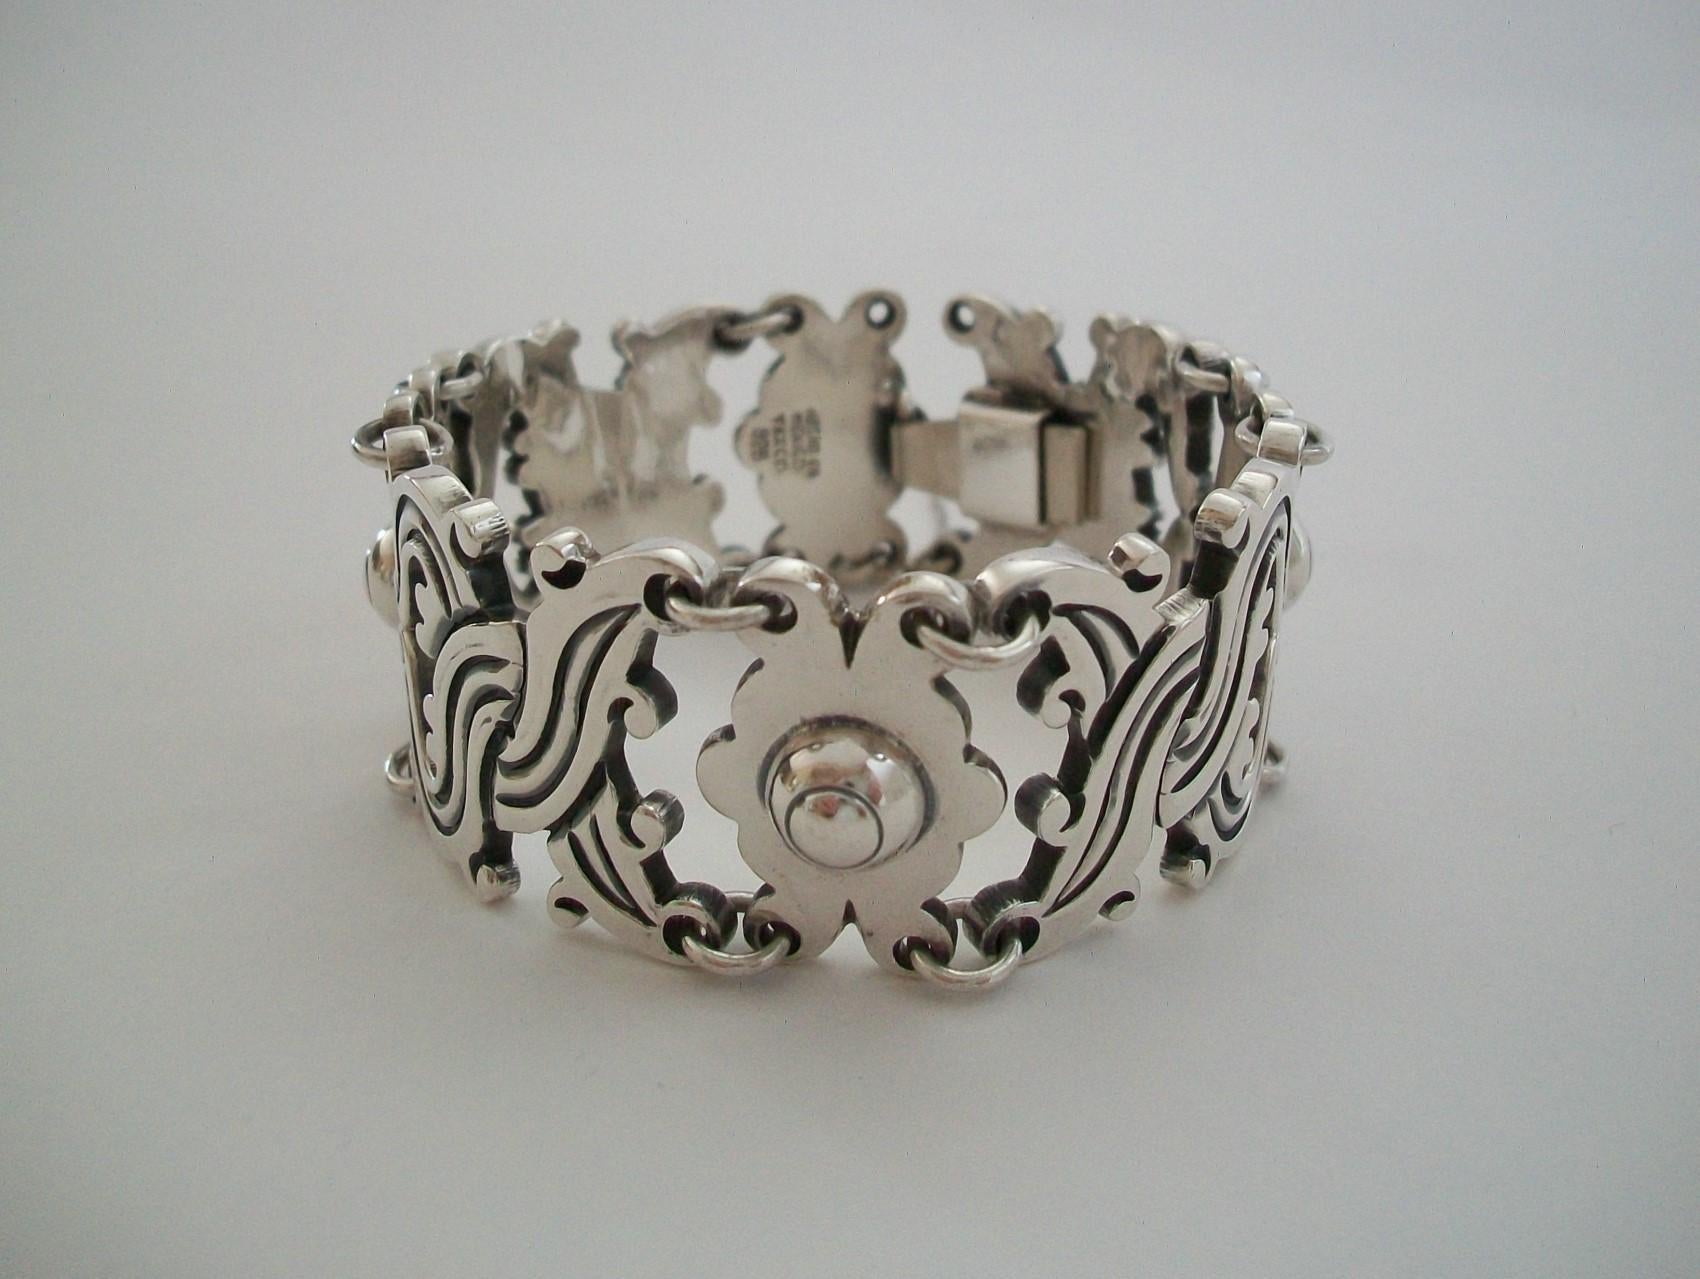 Vintage Taxco heavy sterling silver bracelet - fine quality - featuring linked scrolling panels with incised patterns - box clasp closure with safety chain - marked Hecho en Mexico / Taxco / 925 on last link - Mexico - circa 1980's.

Excellent